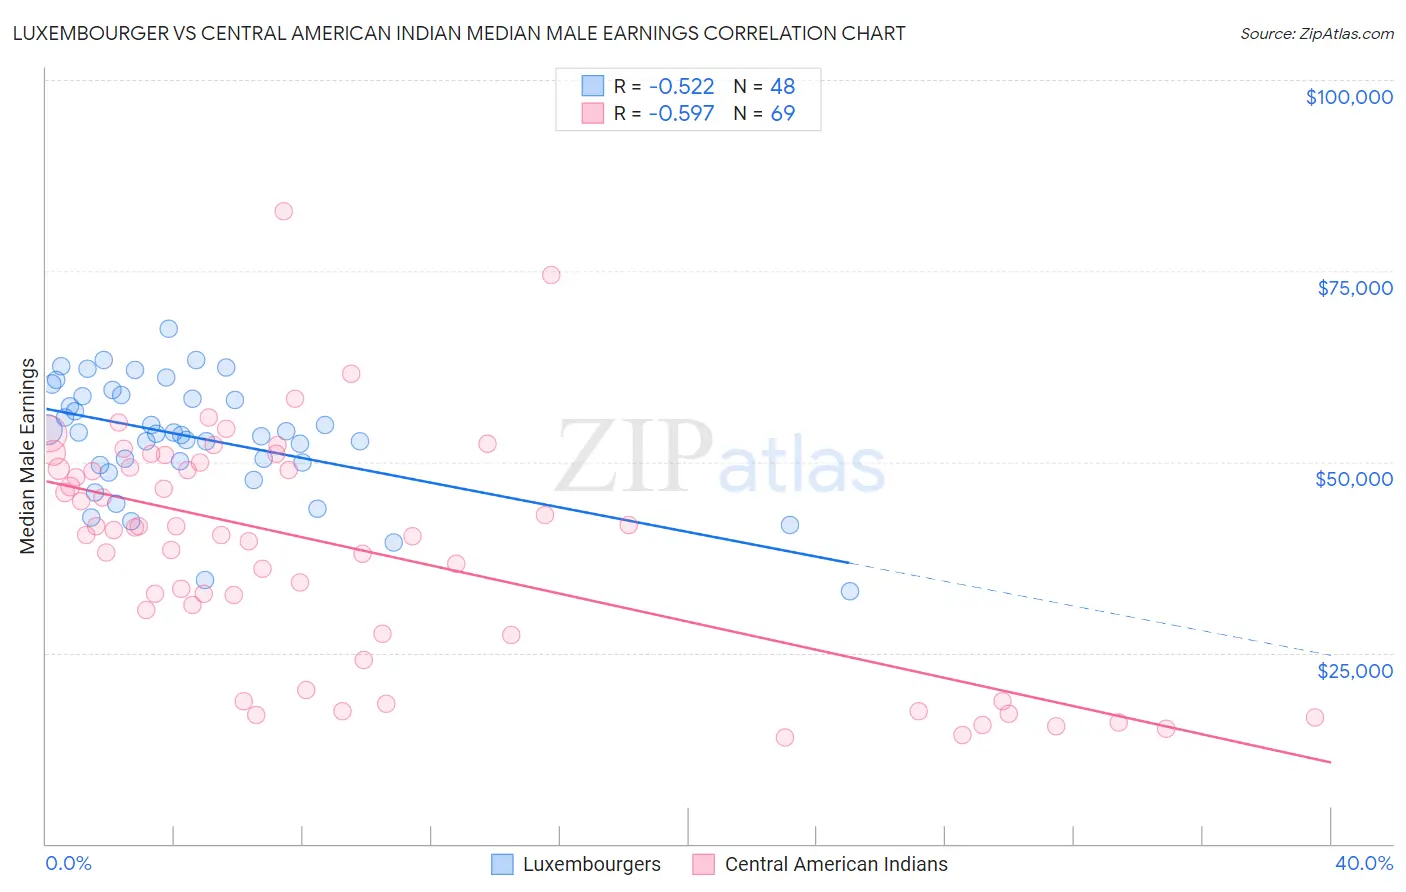 Luxembourger vs Central American Indian Median Male Earnings